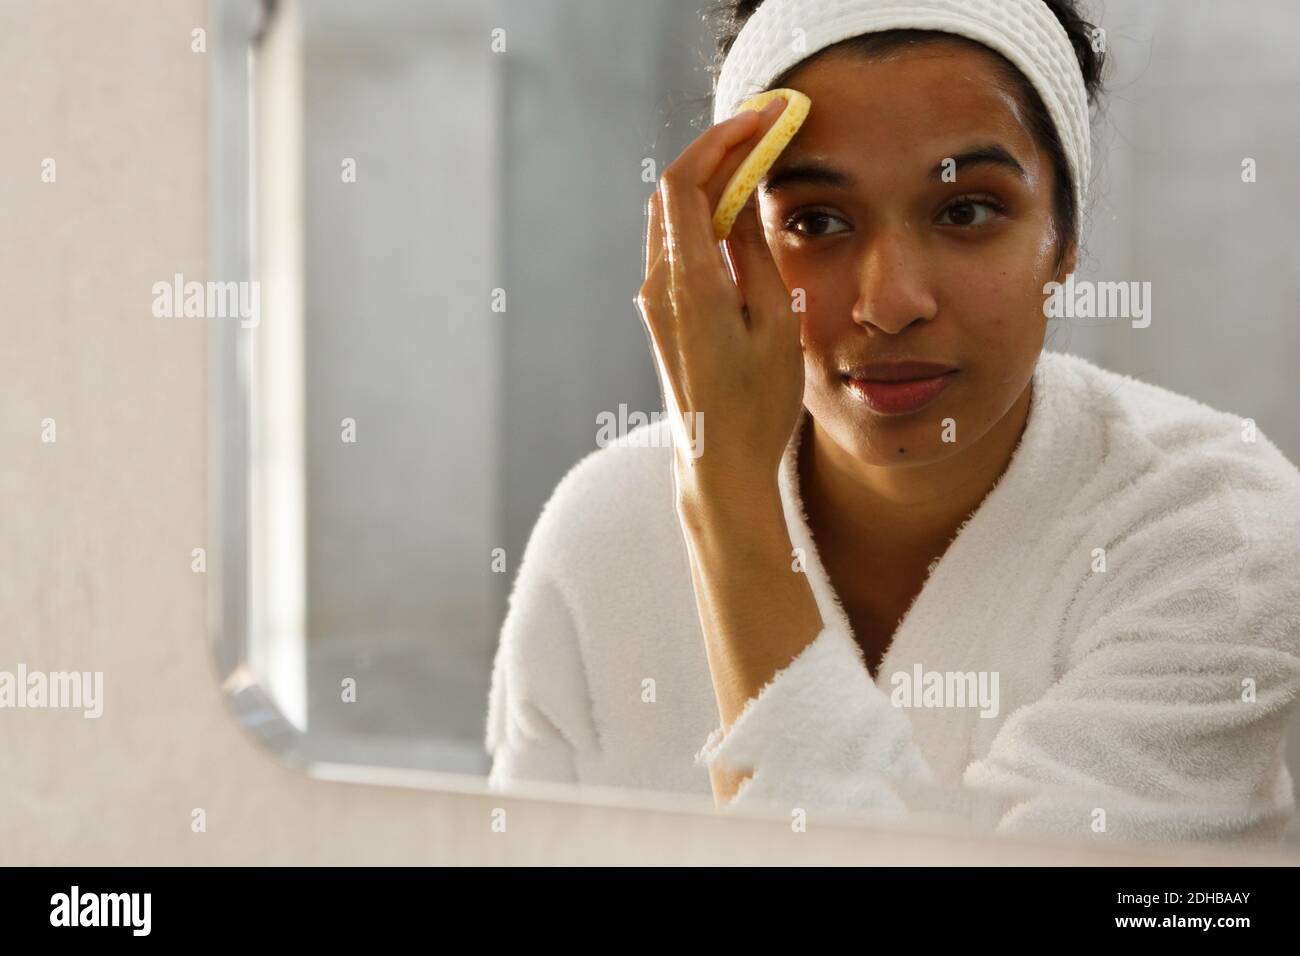 Mixed race woman reflected in mirror cleansing face in bathroom Stock Photo